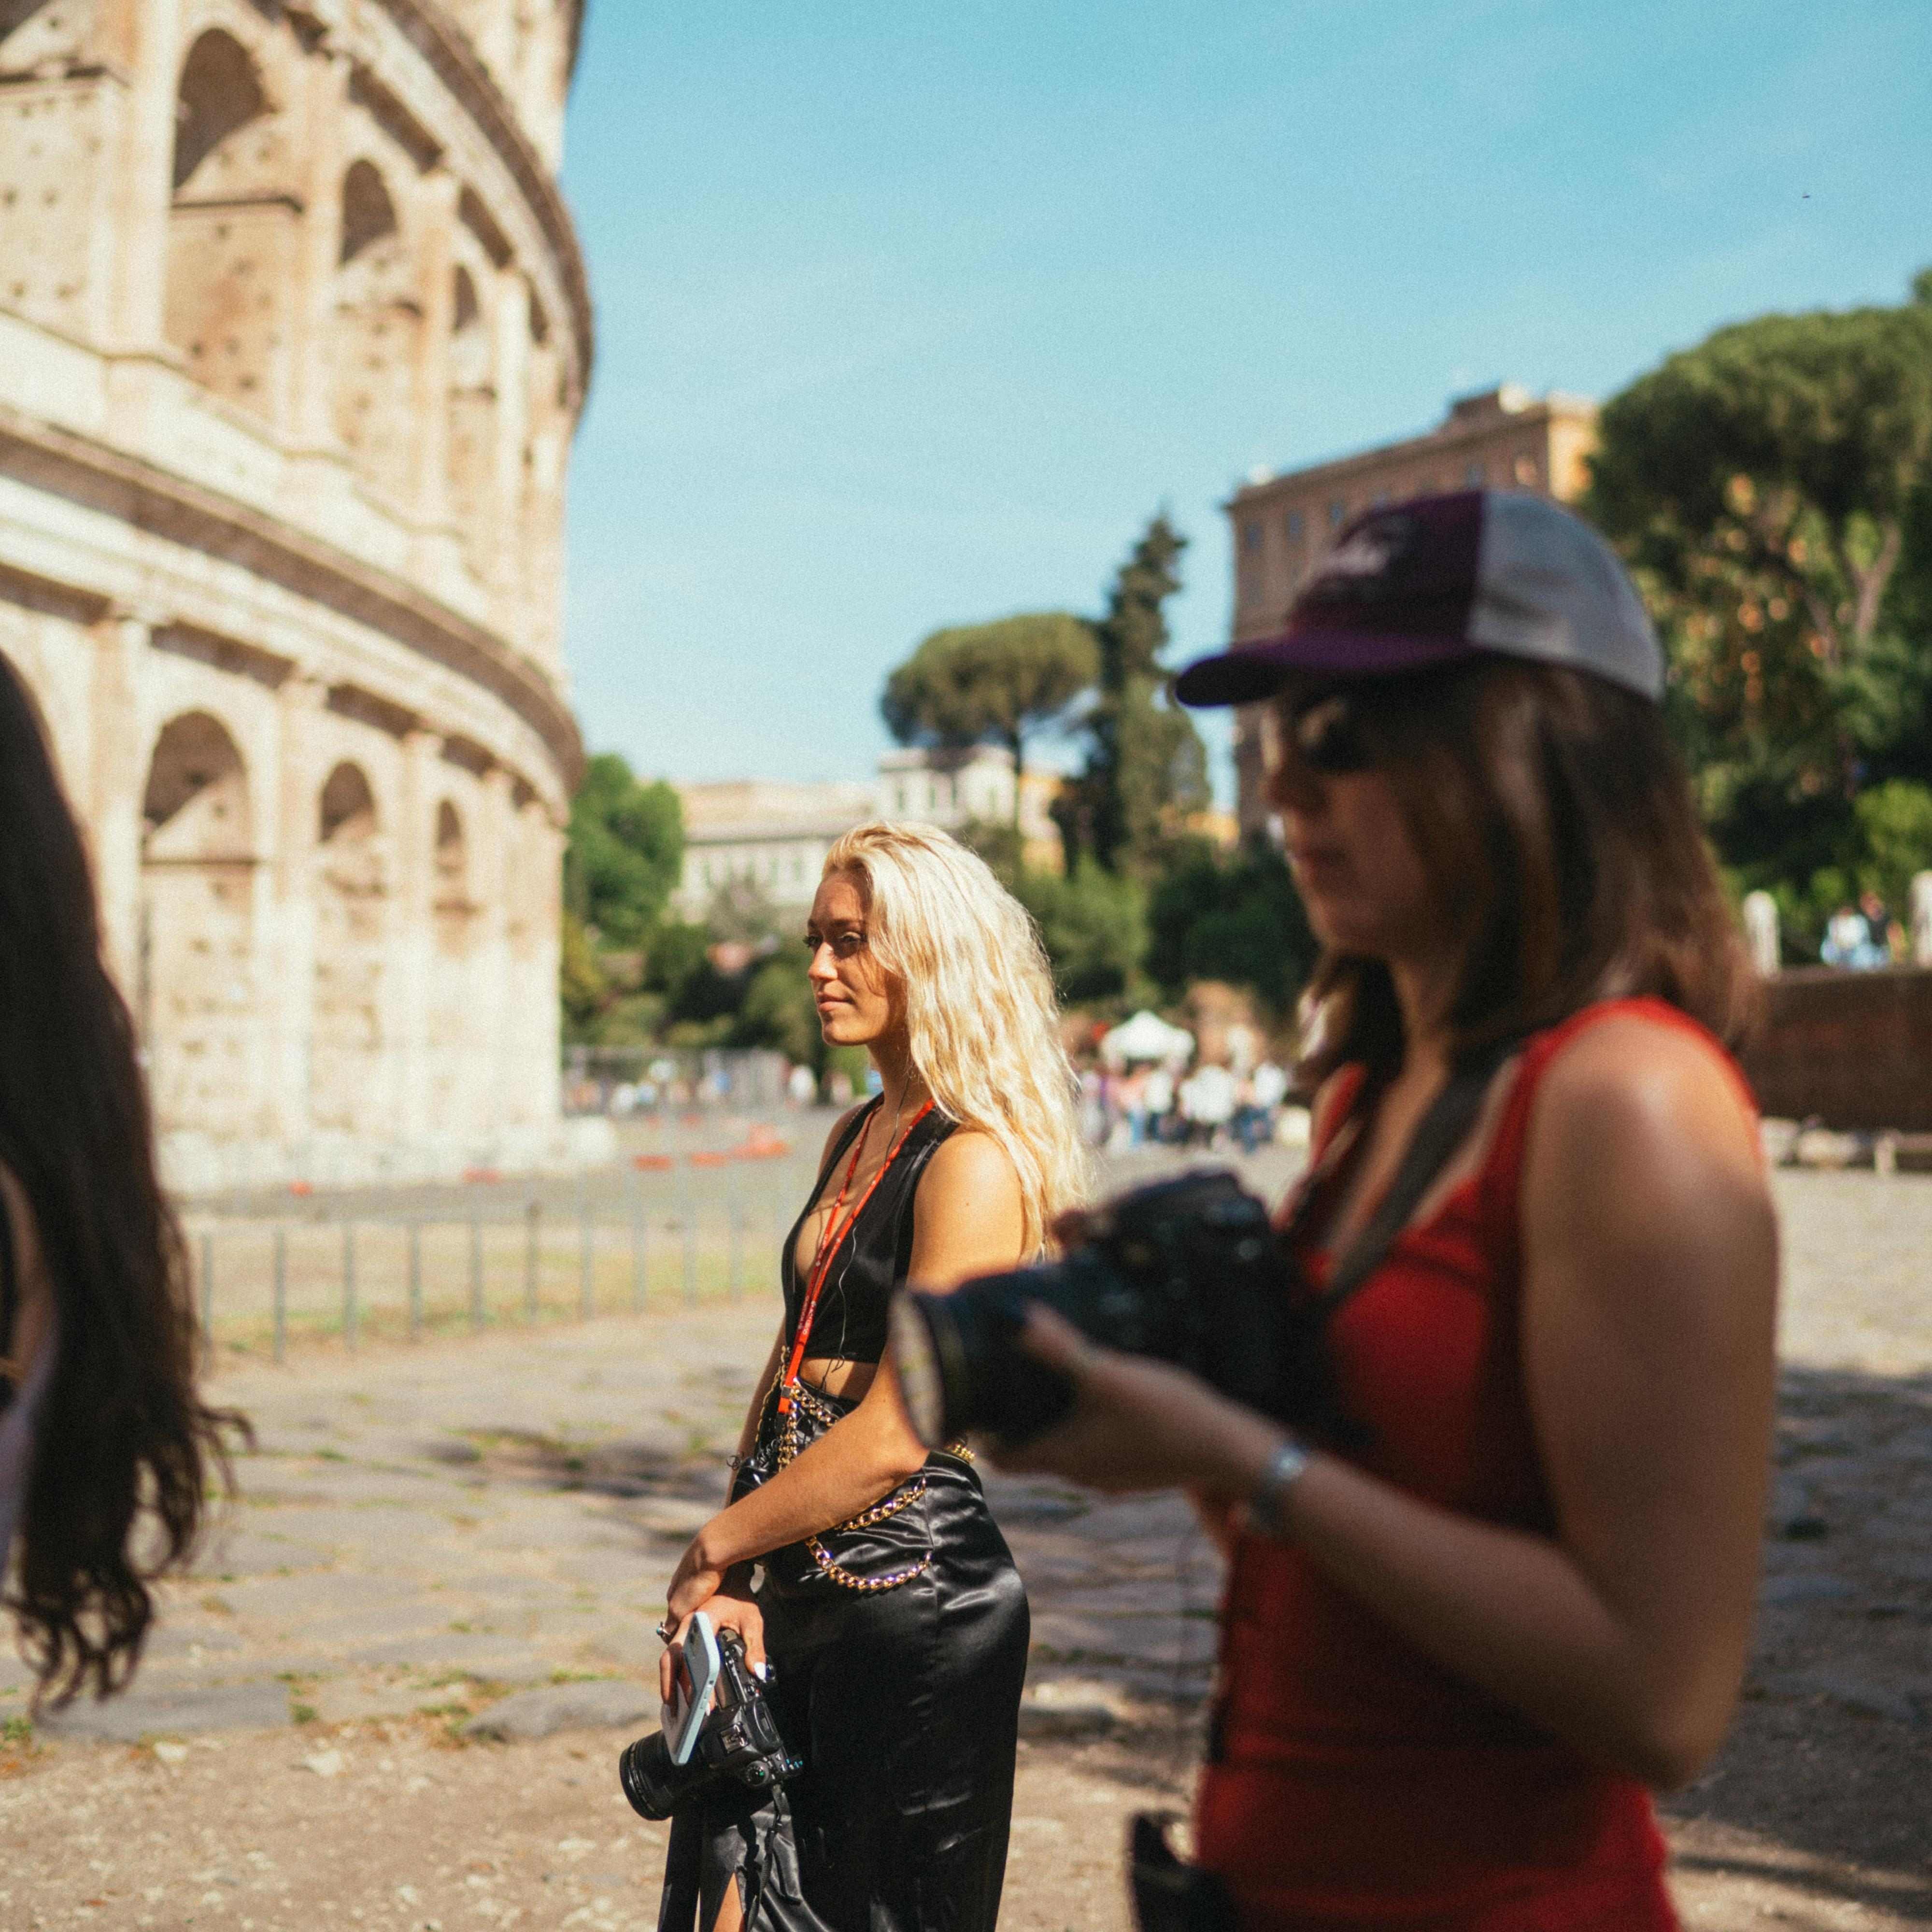 Traveler in Rome holding a camera.